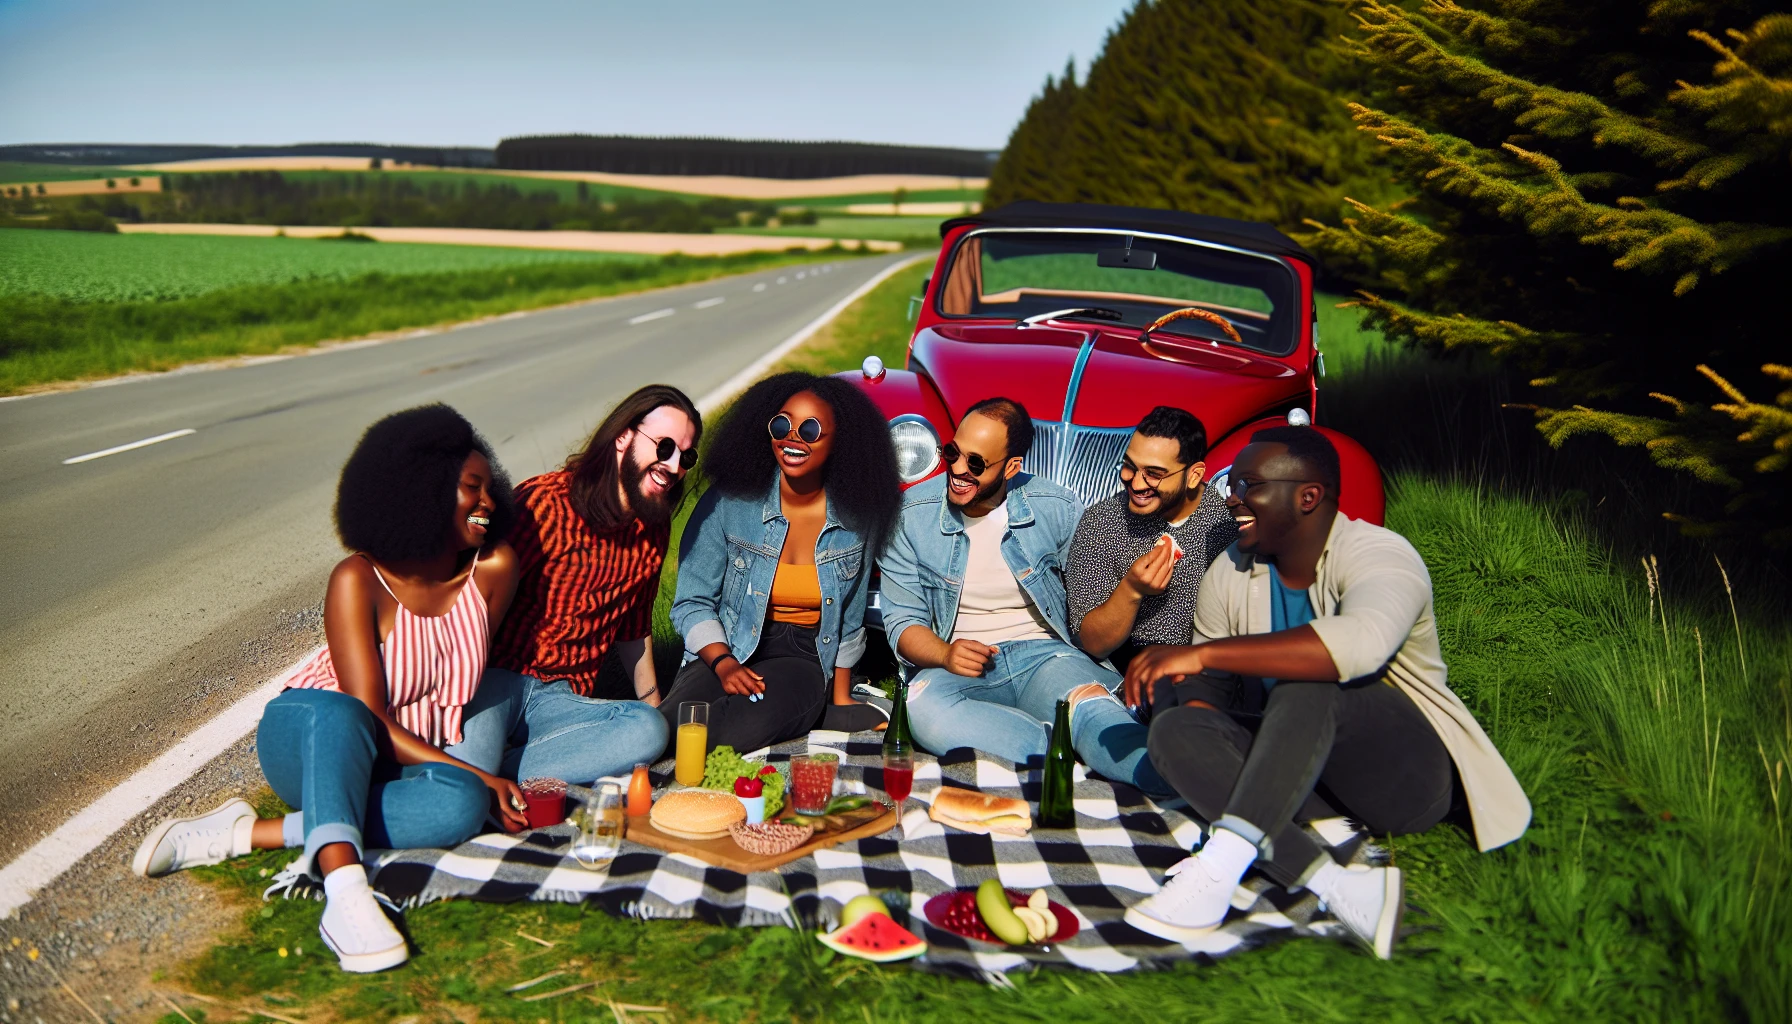 A group of friends enjoying a roadside picnic during a road trip